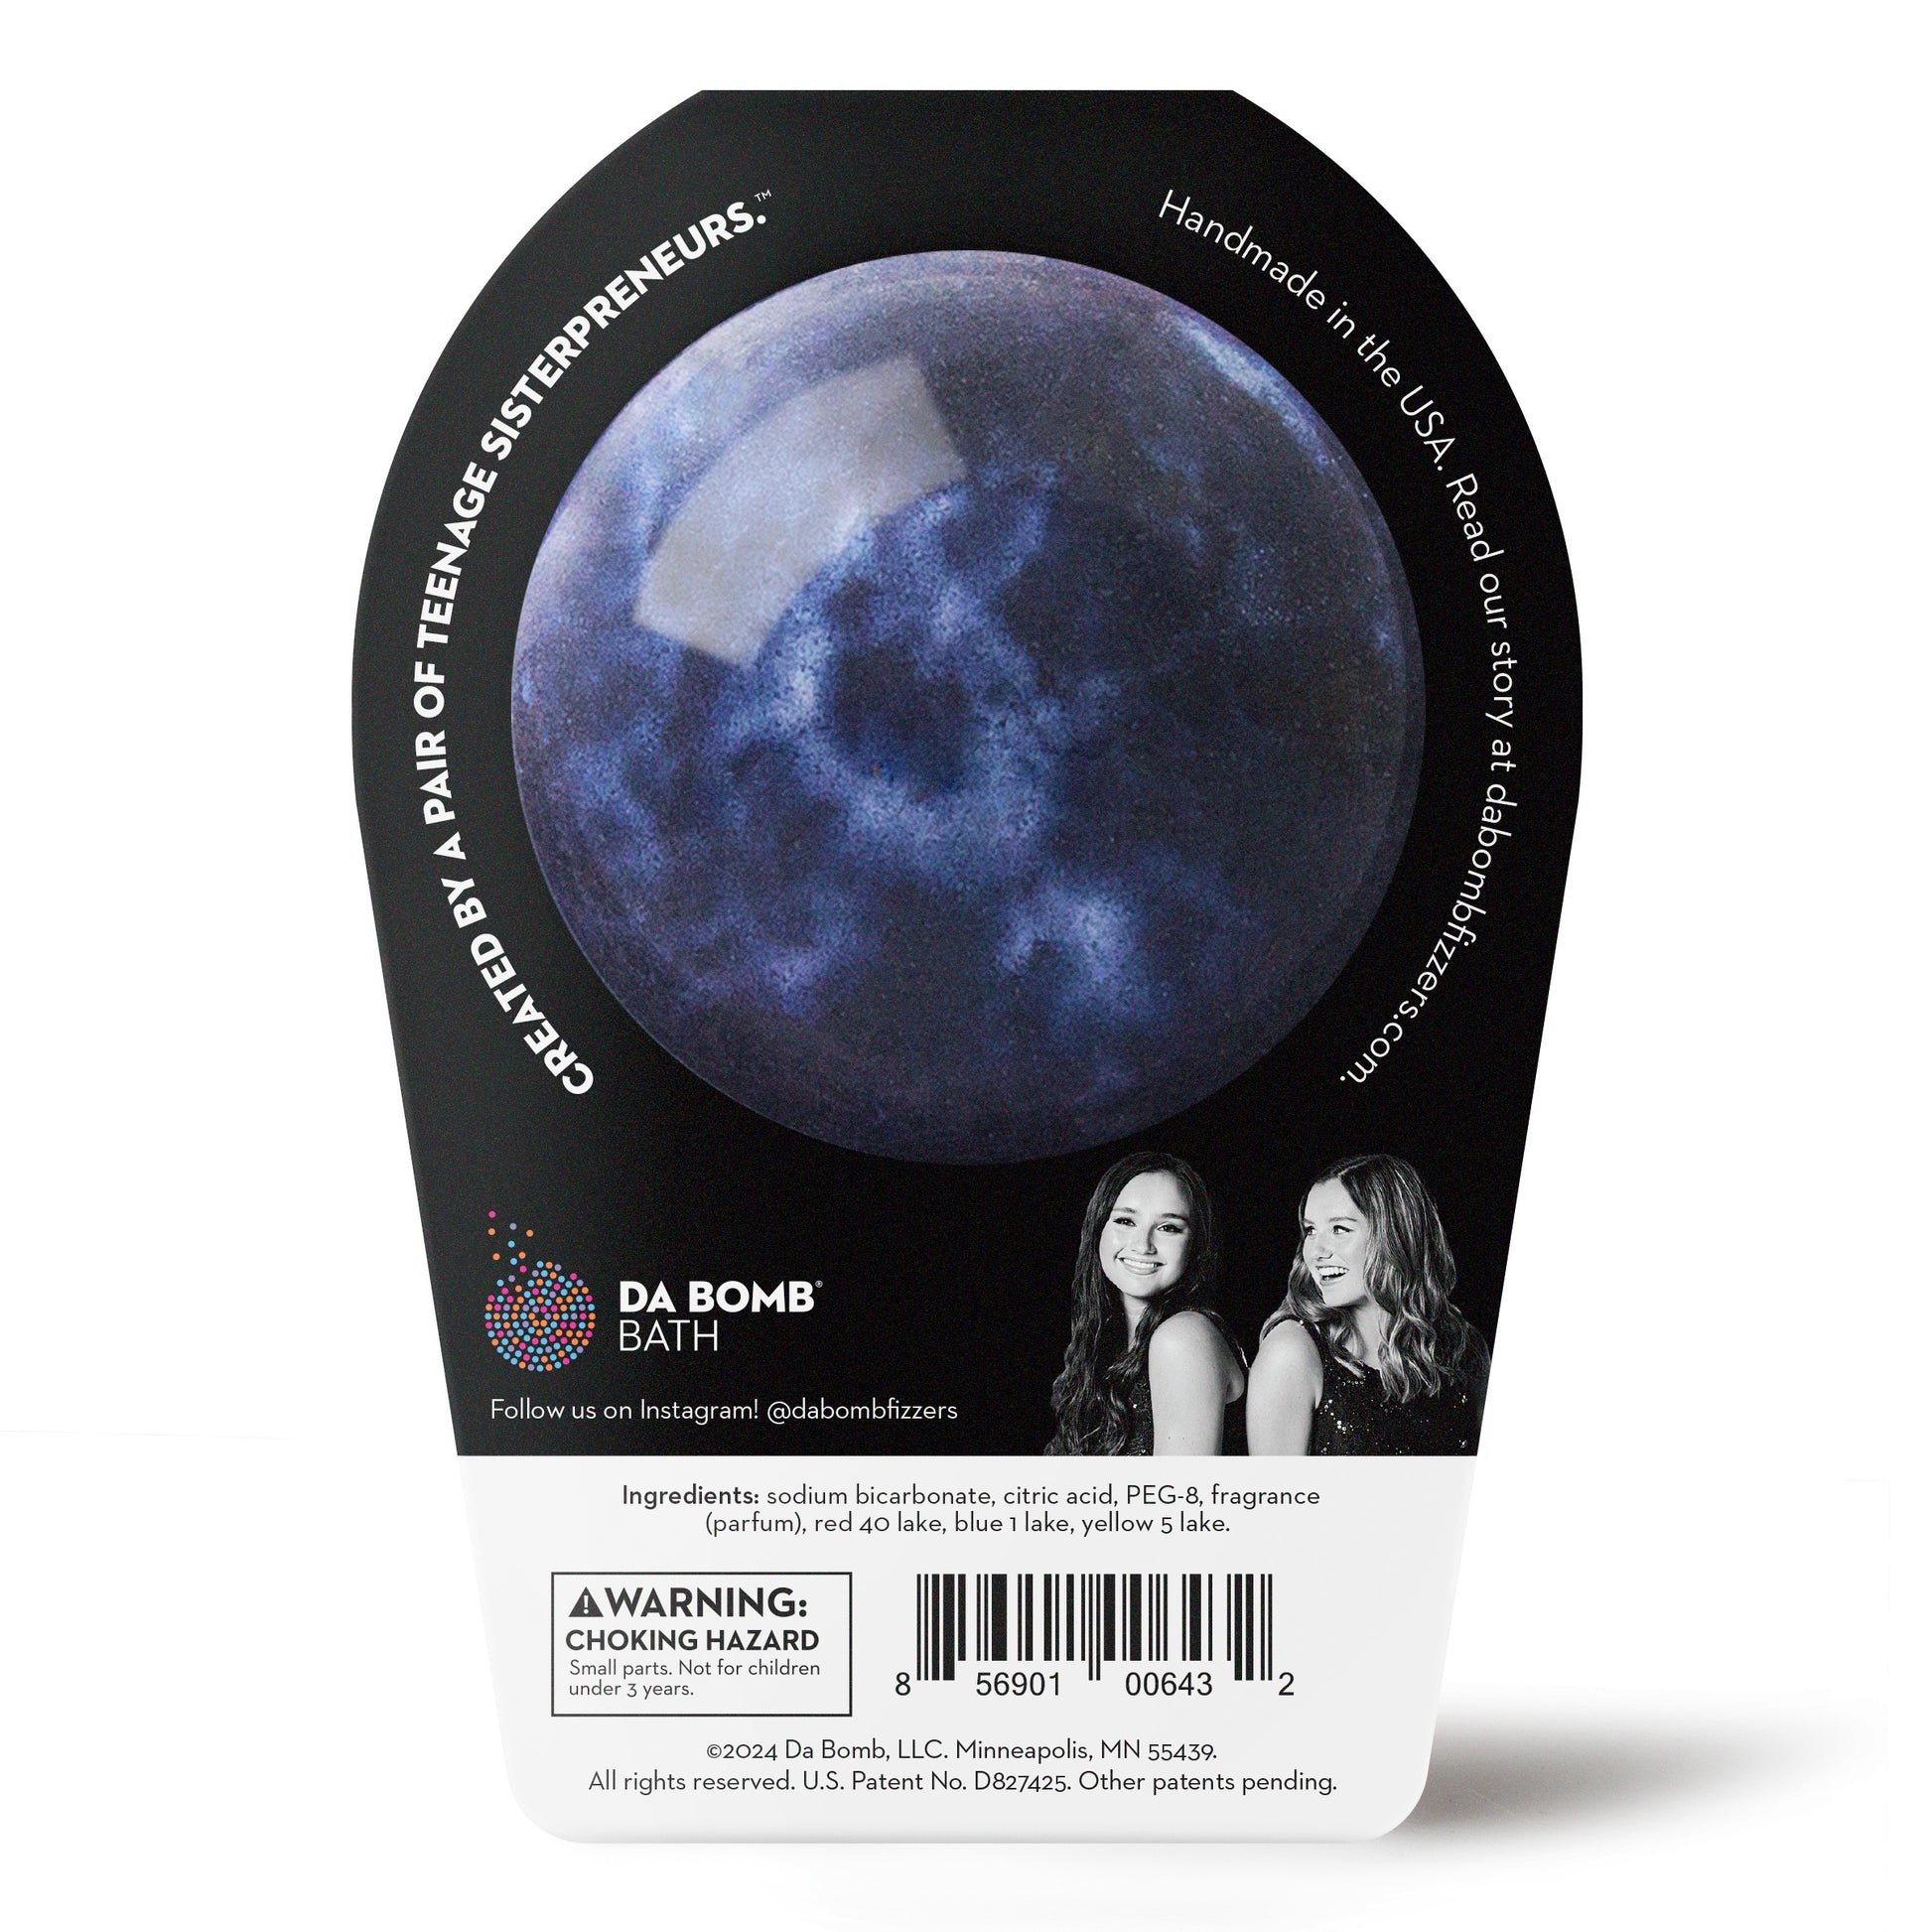 Product photo of a galaxy bath bomb in black packaging by da bomb